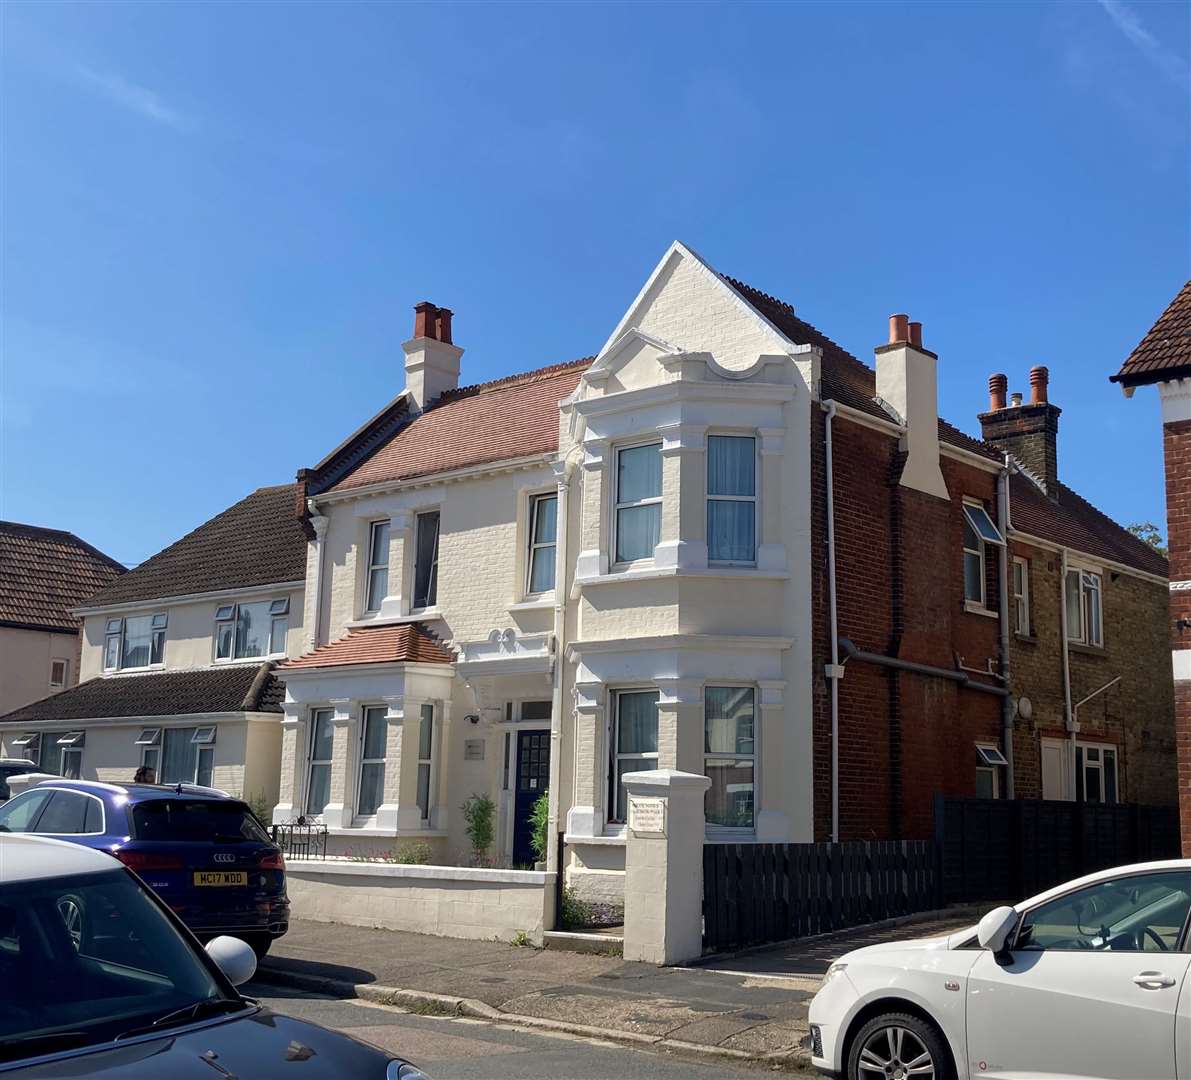 The Broadstairs property has been operating as an HMO for the past two years